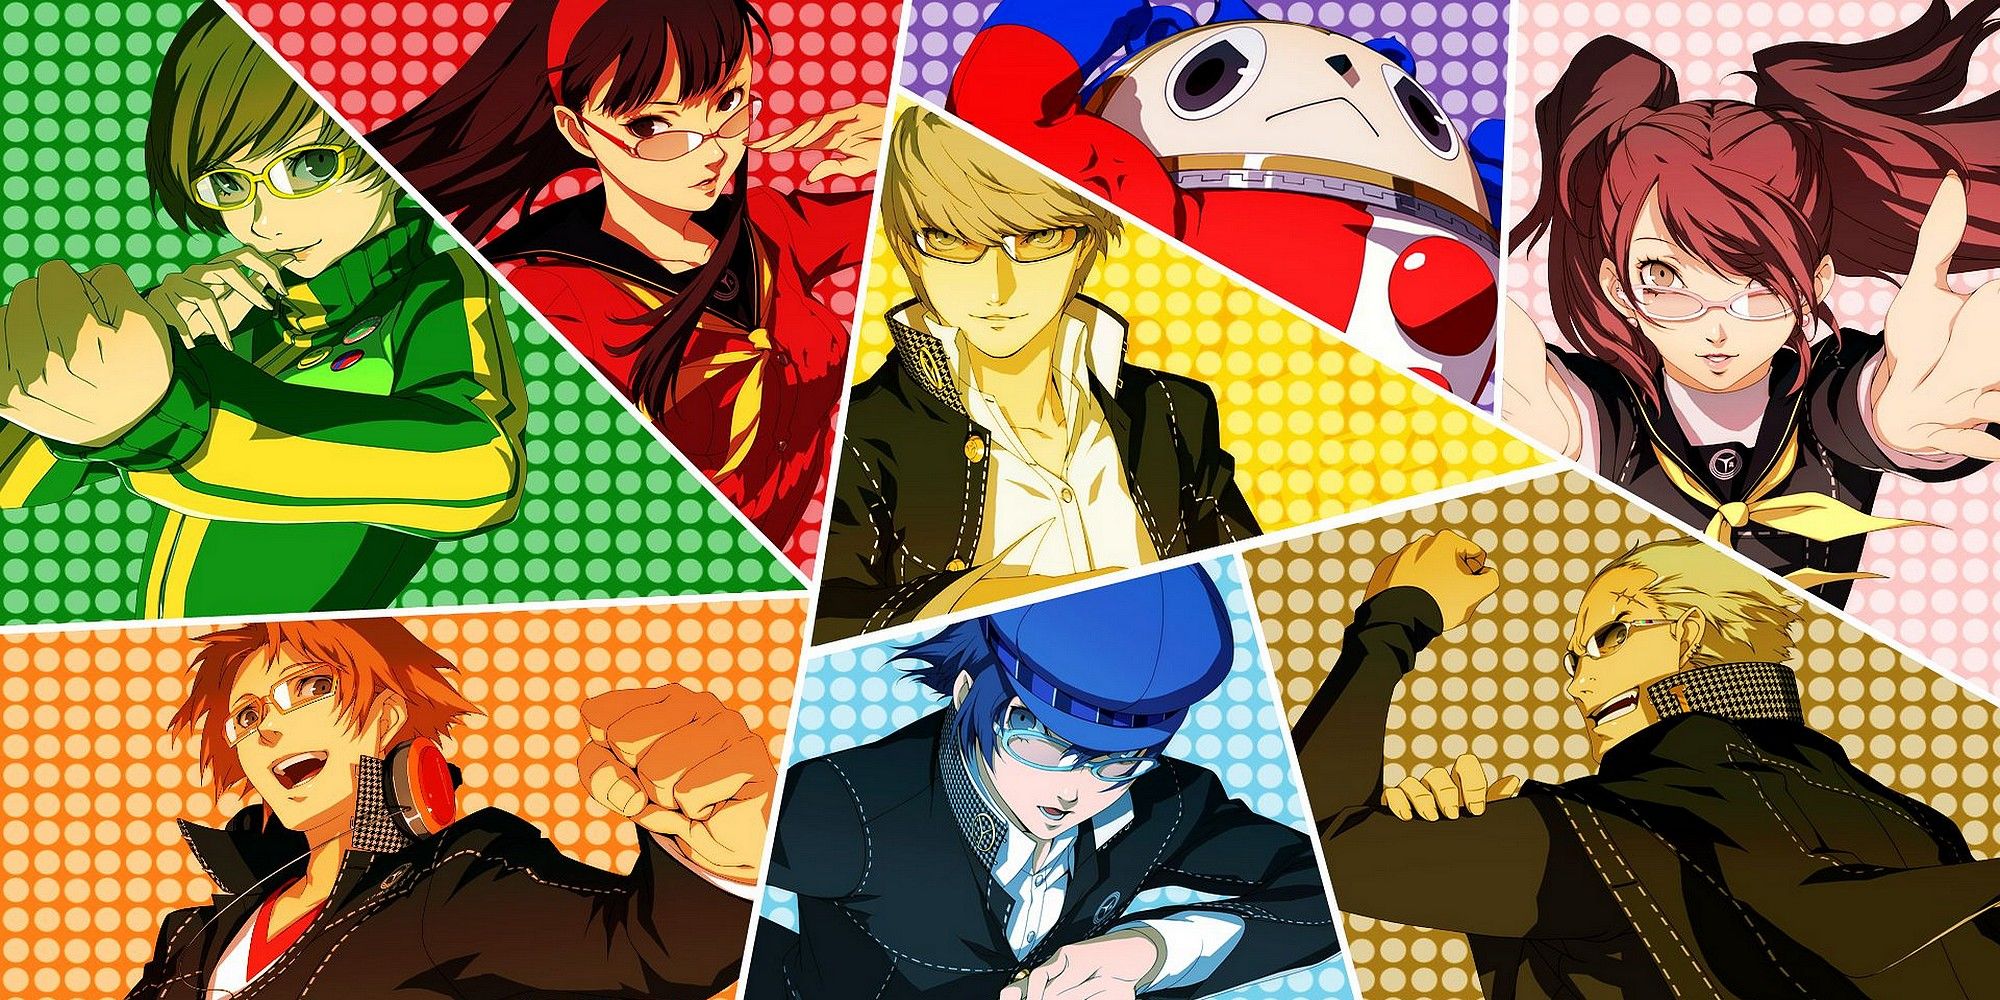 Persona 4 Golden Artwork with all main characters